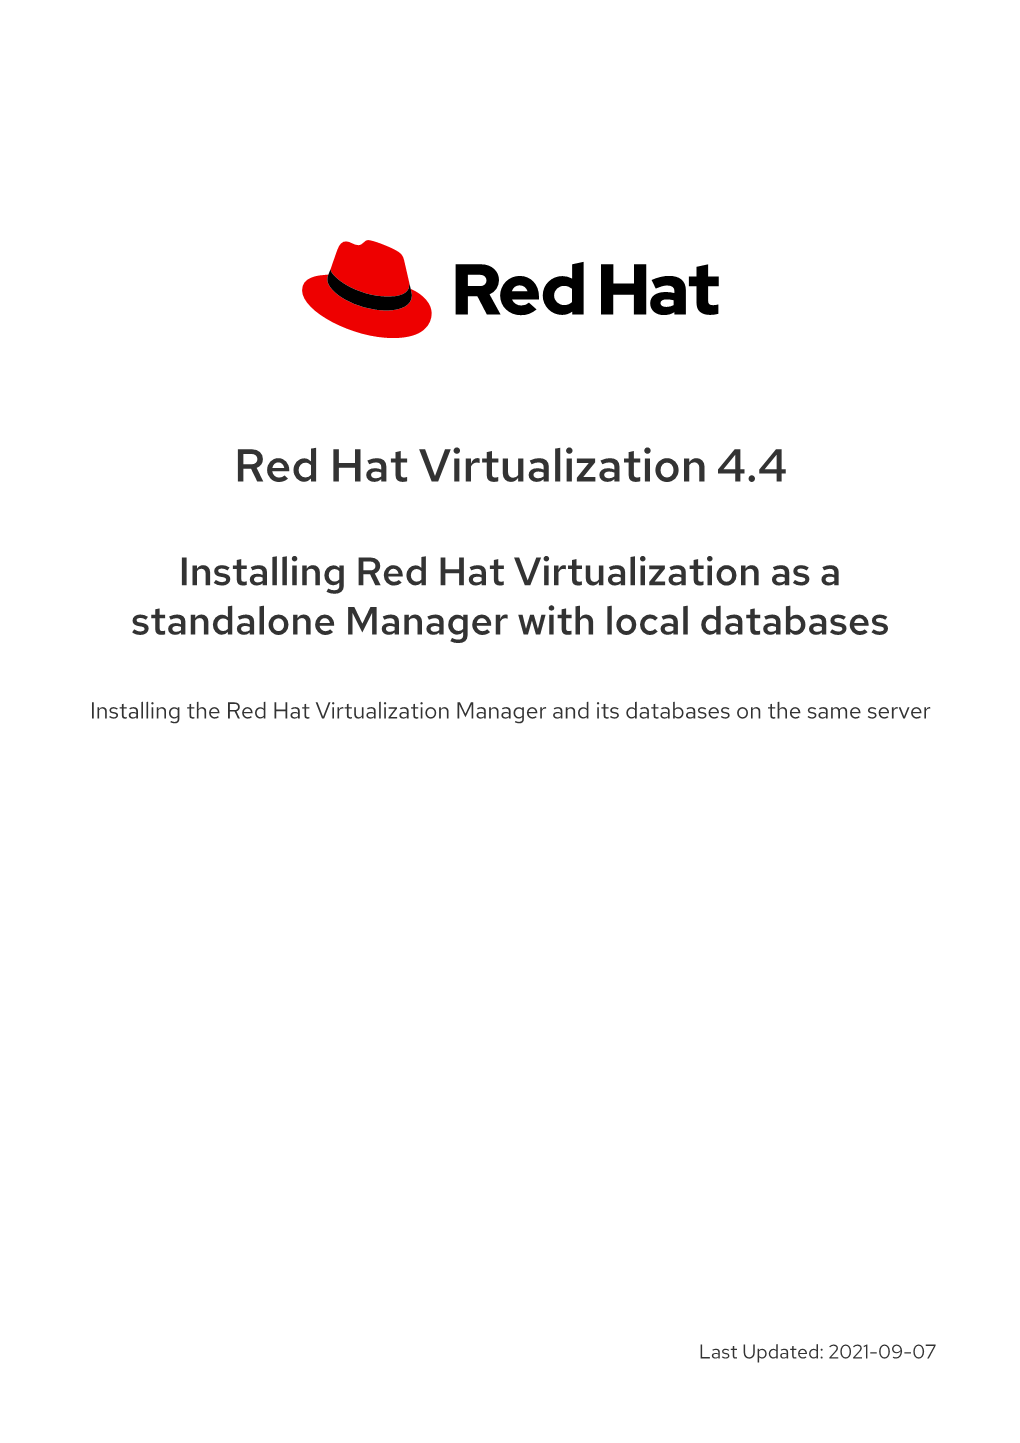 Red Hat Virtualization 4.4 Installing Red Hat Virtualization As a Standalone Manager with Local Databases